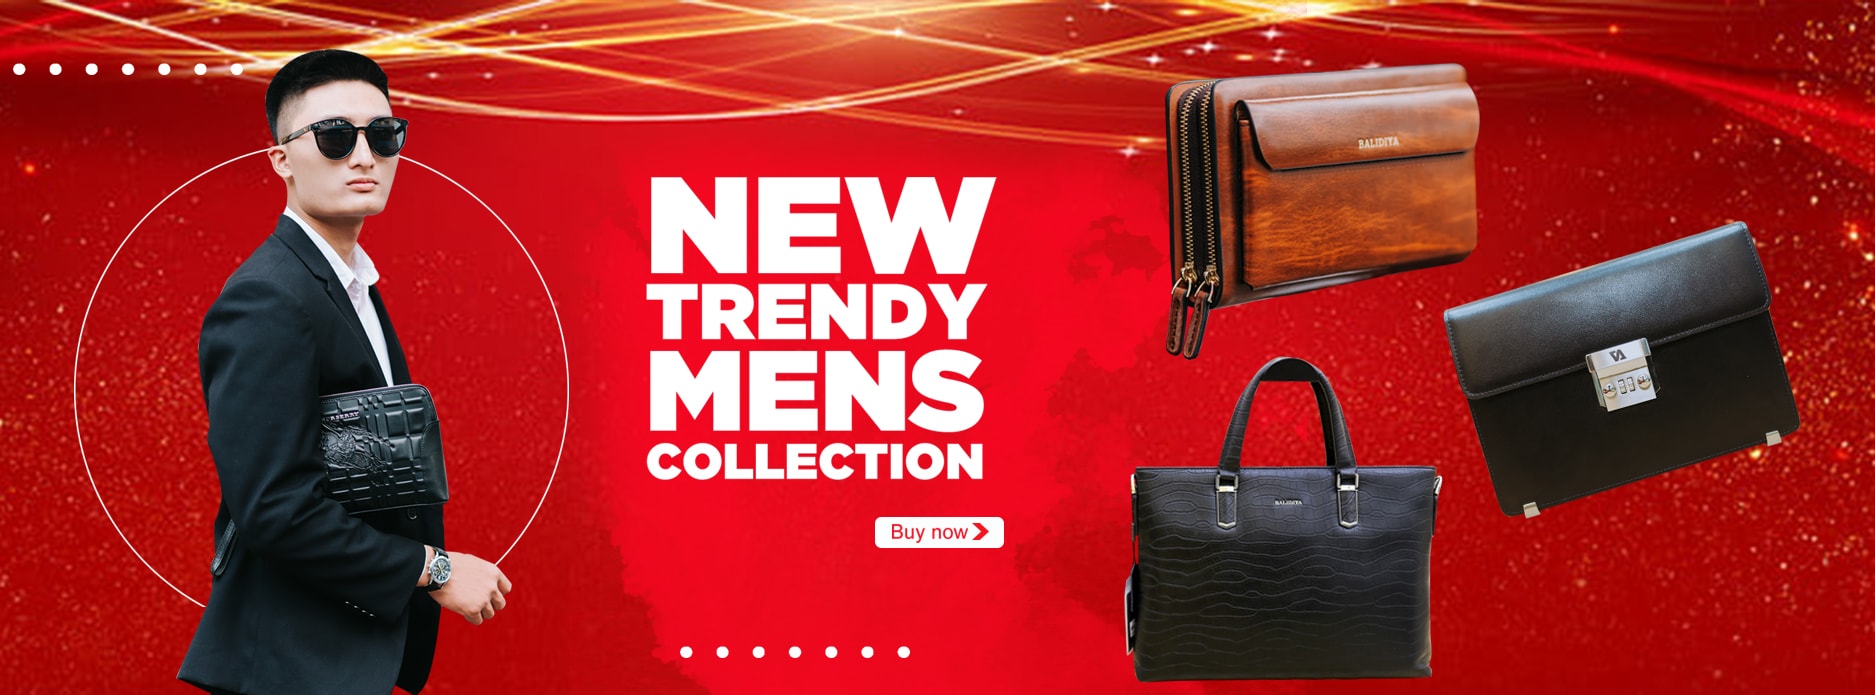 New trendy mens collection